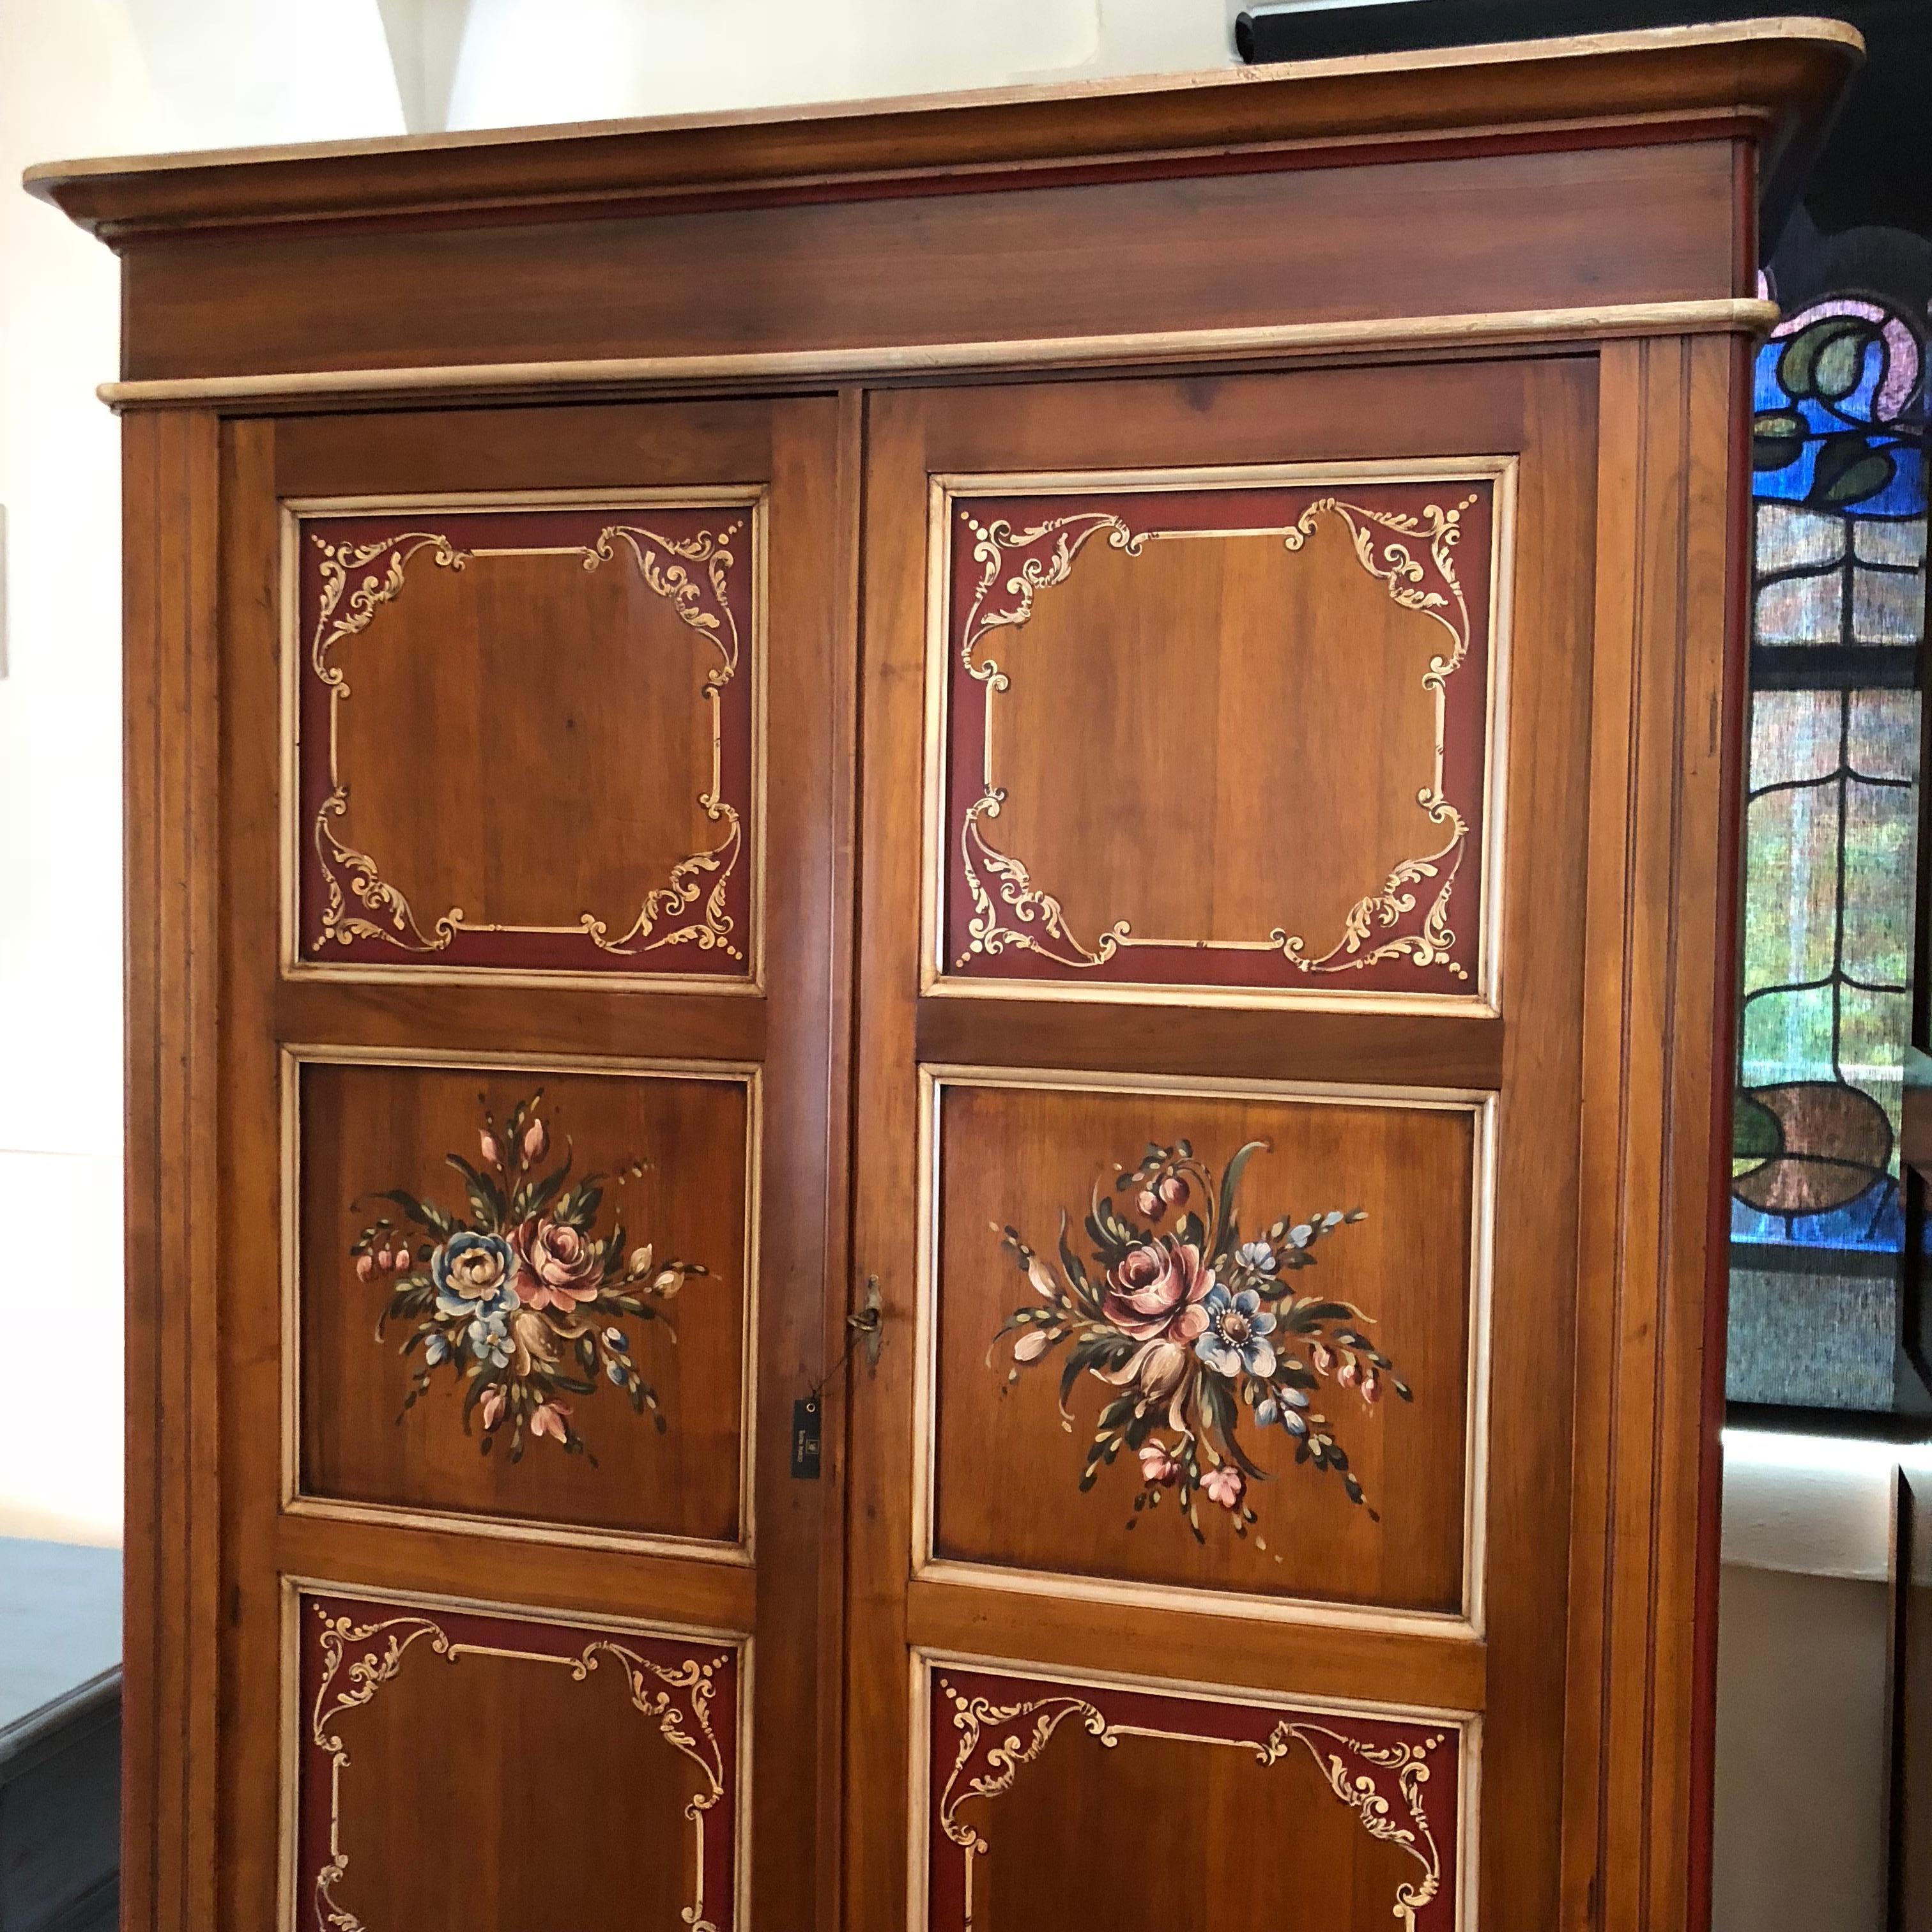 This beautiful Venetian armoire features hand-painted fiore (flowers) to the centre inset panels and hand-painted Venetian scroll frames throughout the front, lower drawer and side panels. This superb piece is made from Italian pine in the late 19th